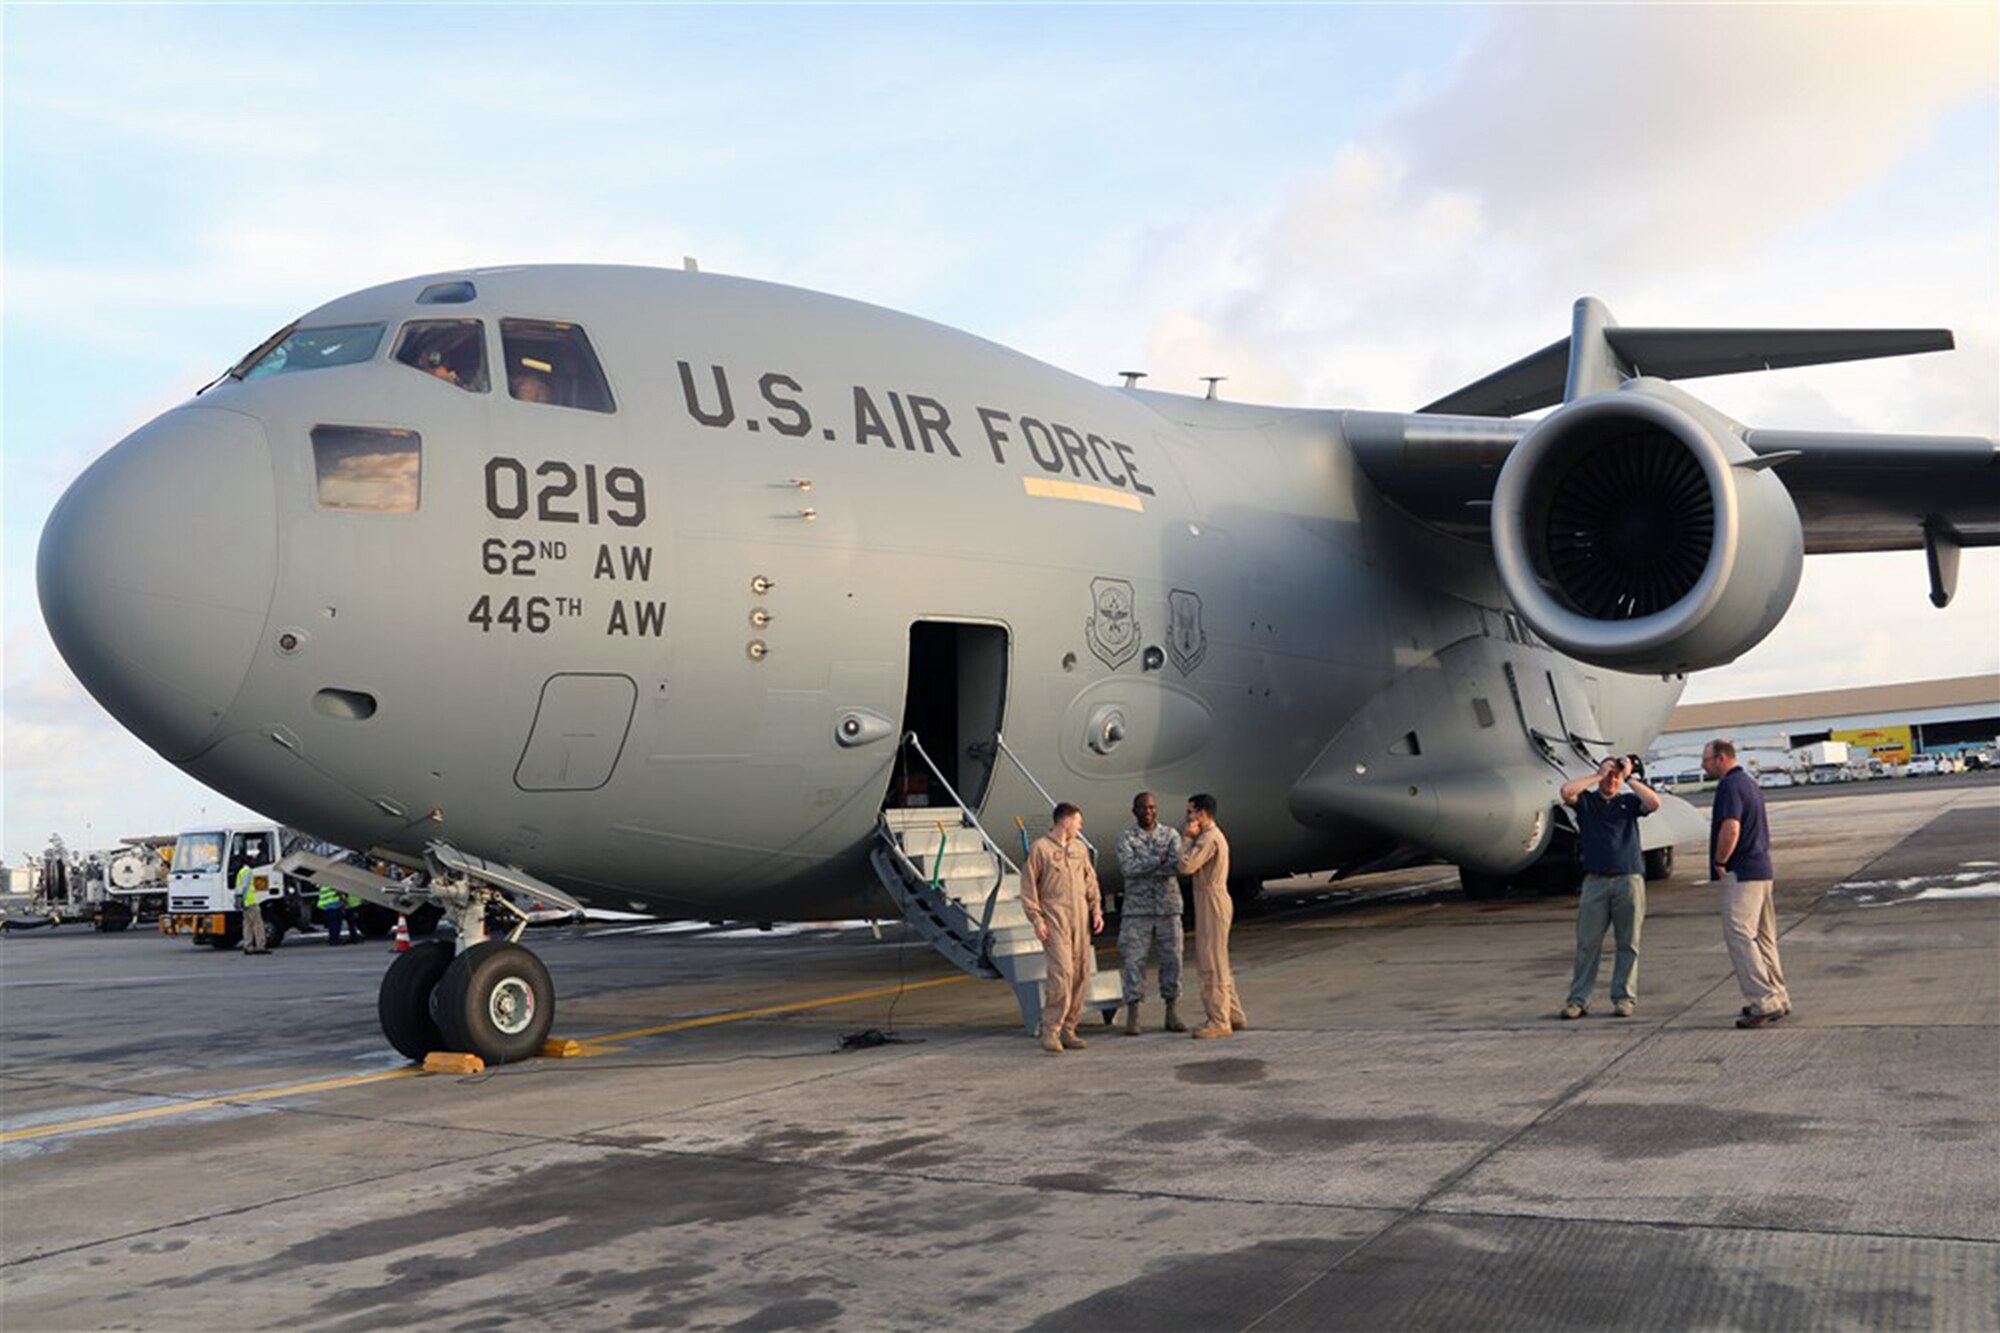 A Joint Base Lewis-McChord C-17 Globemaster III aircraft arrived in Liberia Oct. 8, with the first shipment of increased military equipment and personnel for the anti-Ebola fight, Operation Unified Assistance. The cargo included a heavy duty forklift, a drill set and generator and a team of seven military personnel, including engineers and airfield specialists. (photo courtesy/U.S. Embassy, Monrovia, Liberia)